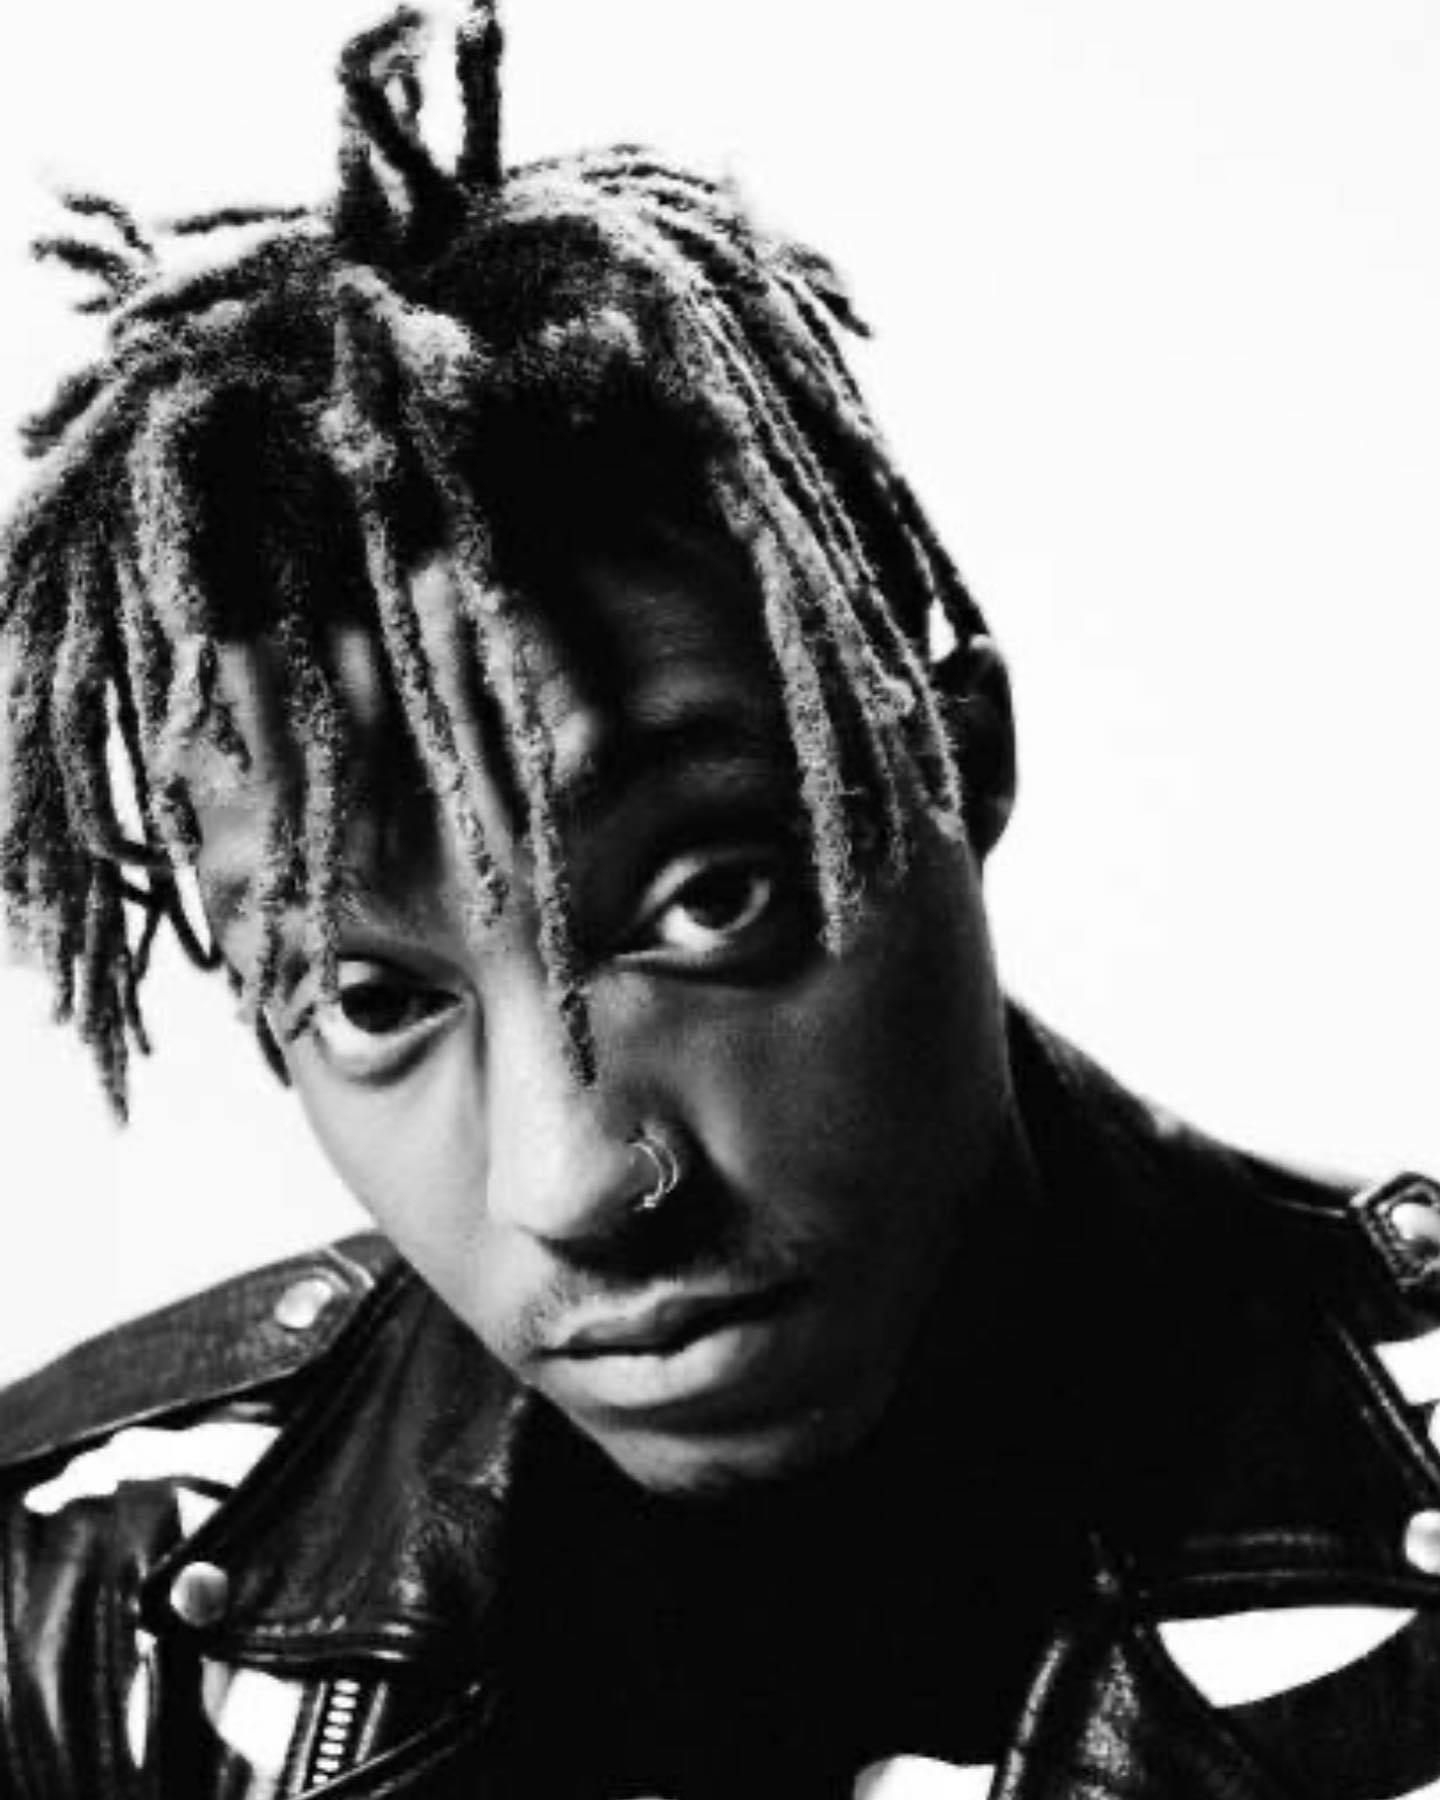 Devastated this morning to hear of the death of one of my favorite new artists of the last 10 years. Rest in peace @juicewrld999 you  brought such incredible music to the world in your short life.  21 years old.  Gone far too soon.  My condolences to the friends, family, and fans of this talented man.